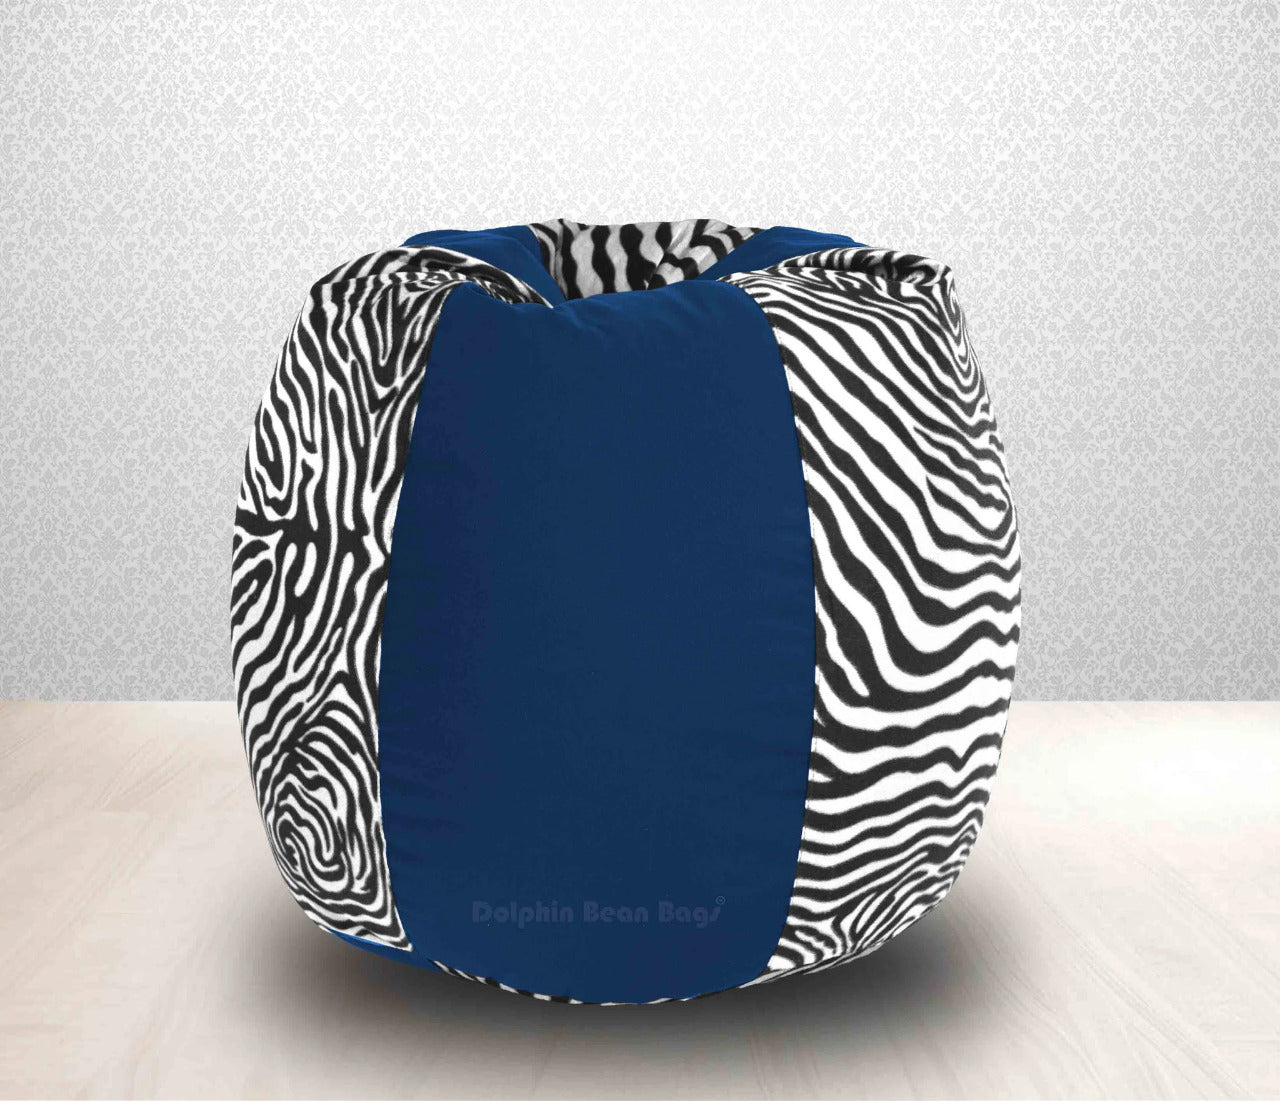 Bean Bag : XXL R.Blue/Zebra(Blk-White)-FABRIC-FILLED & WASHABLE (with Beans)